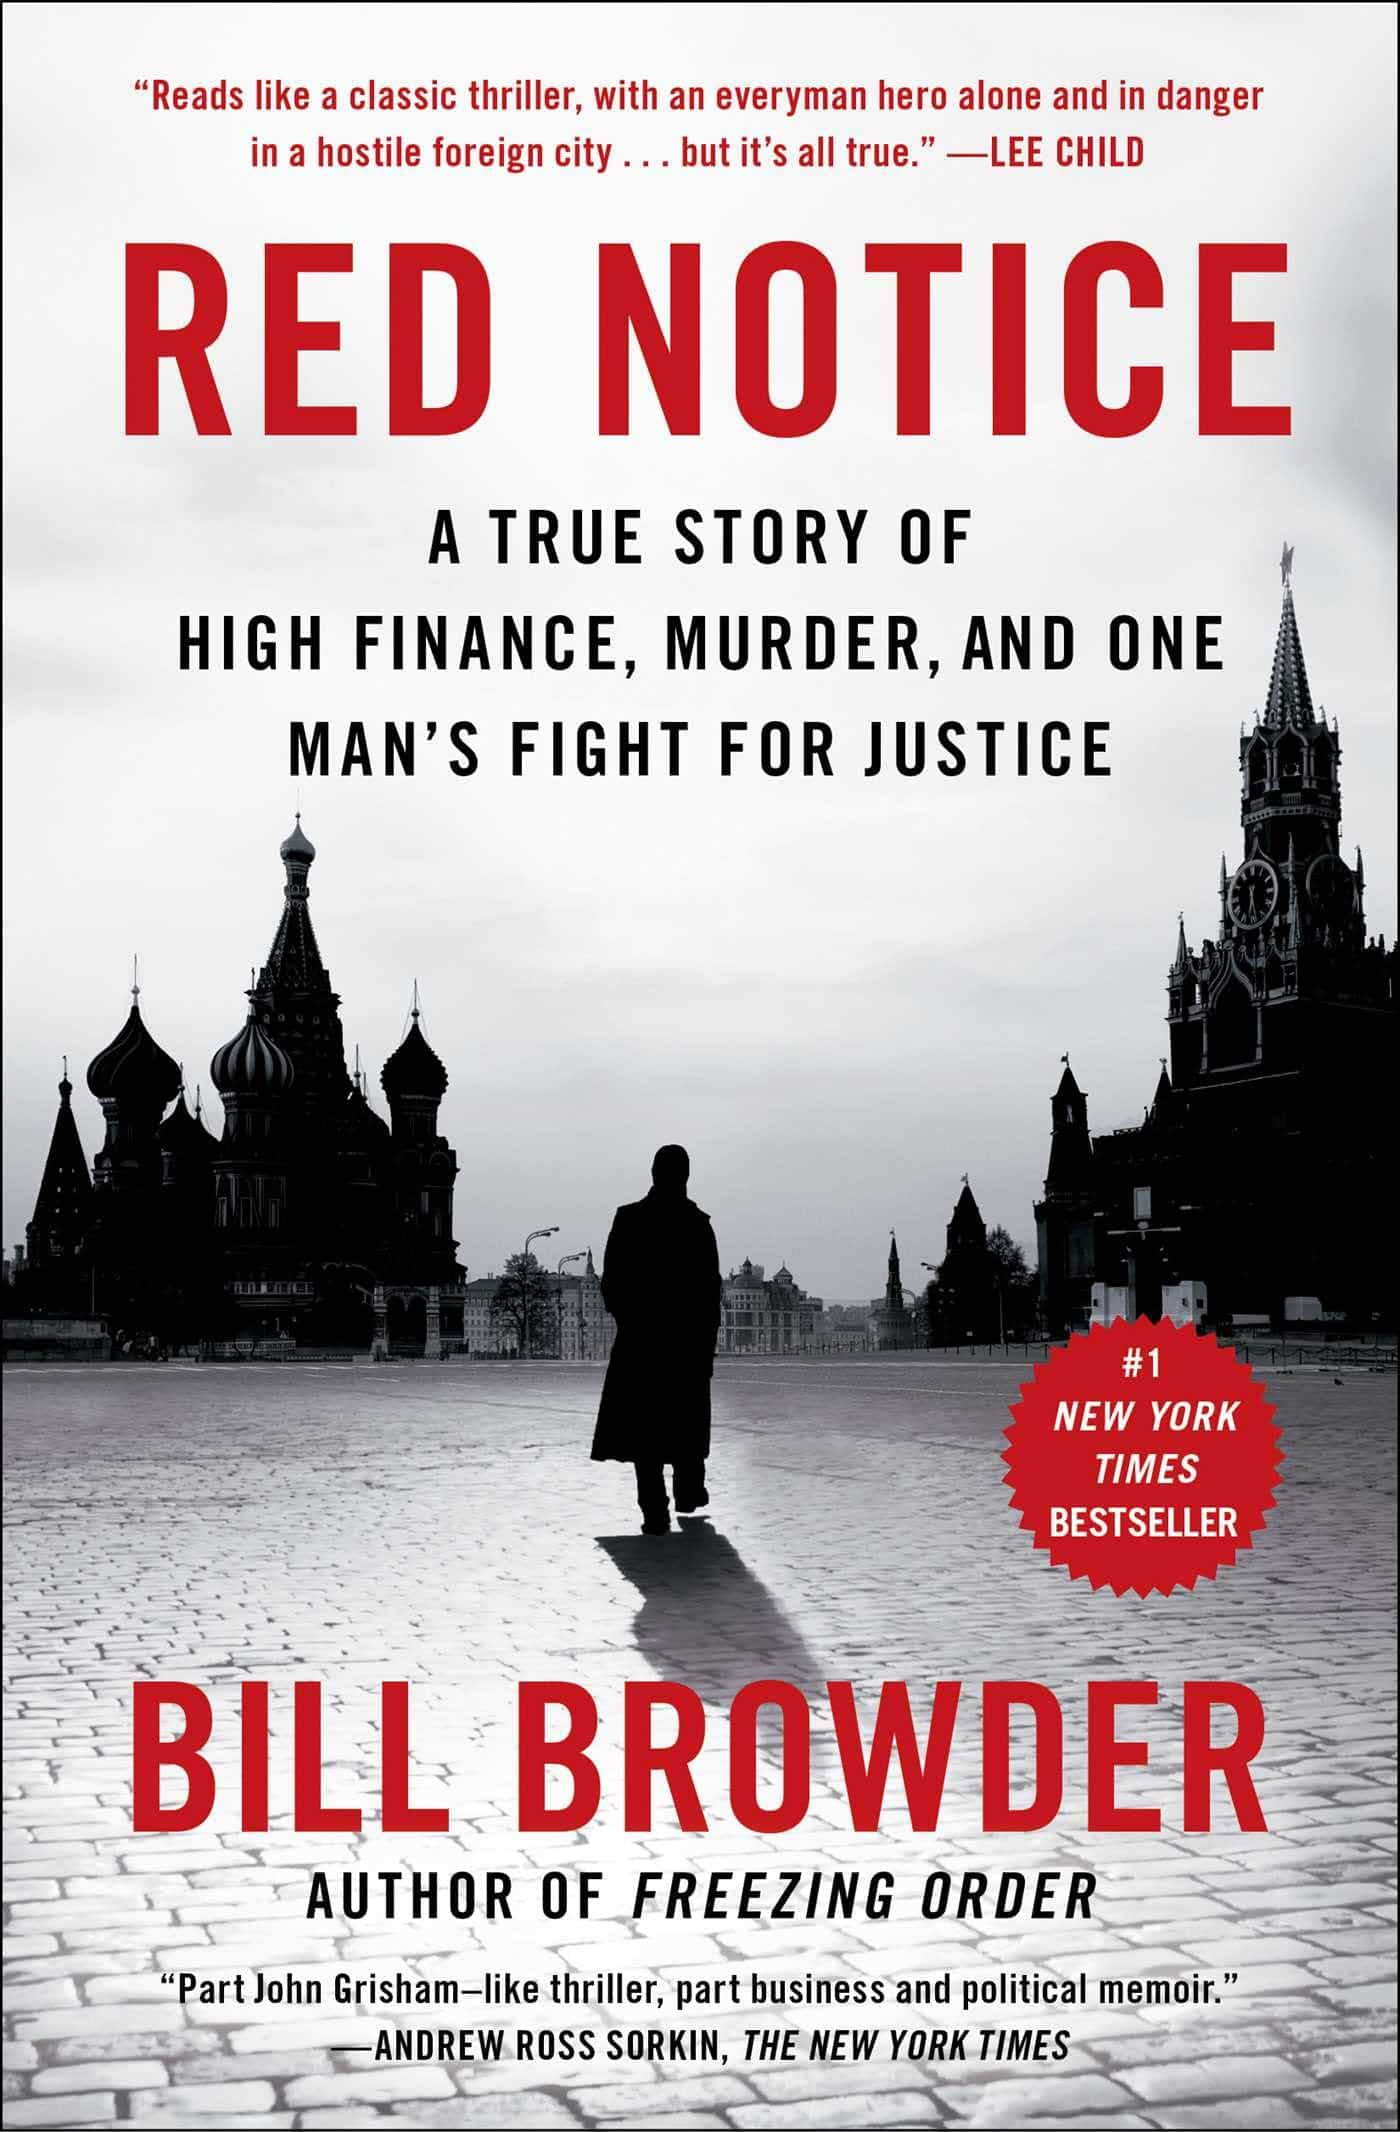 The cover of Red Notice